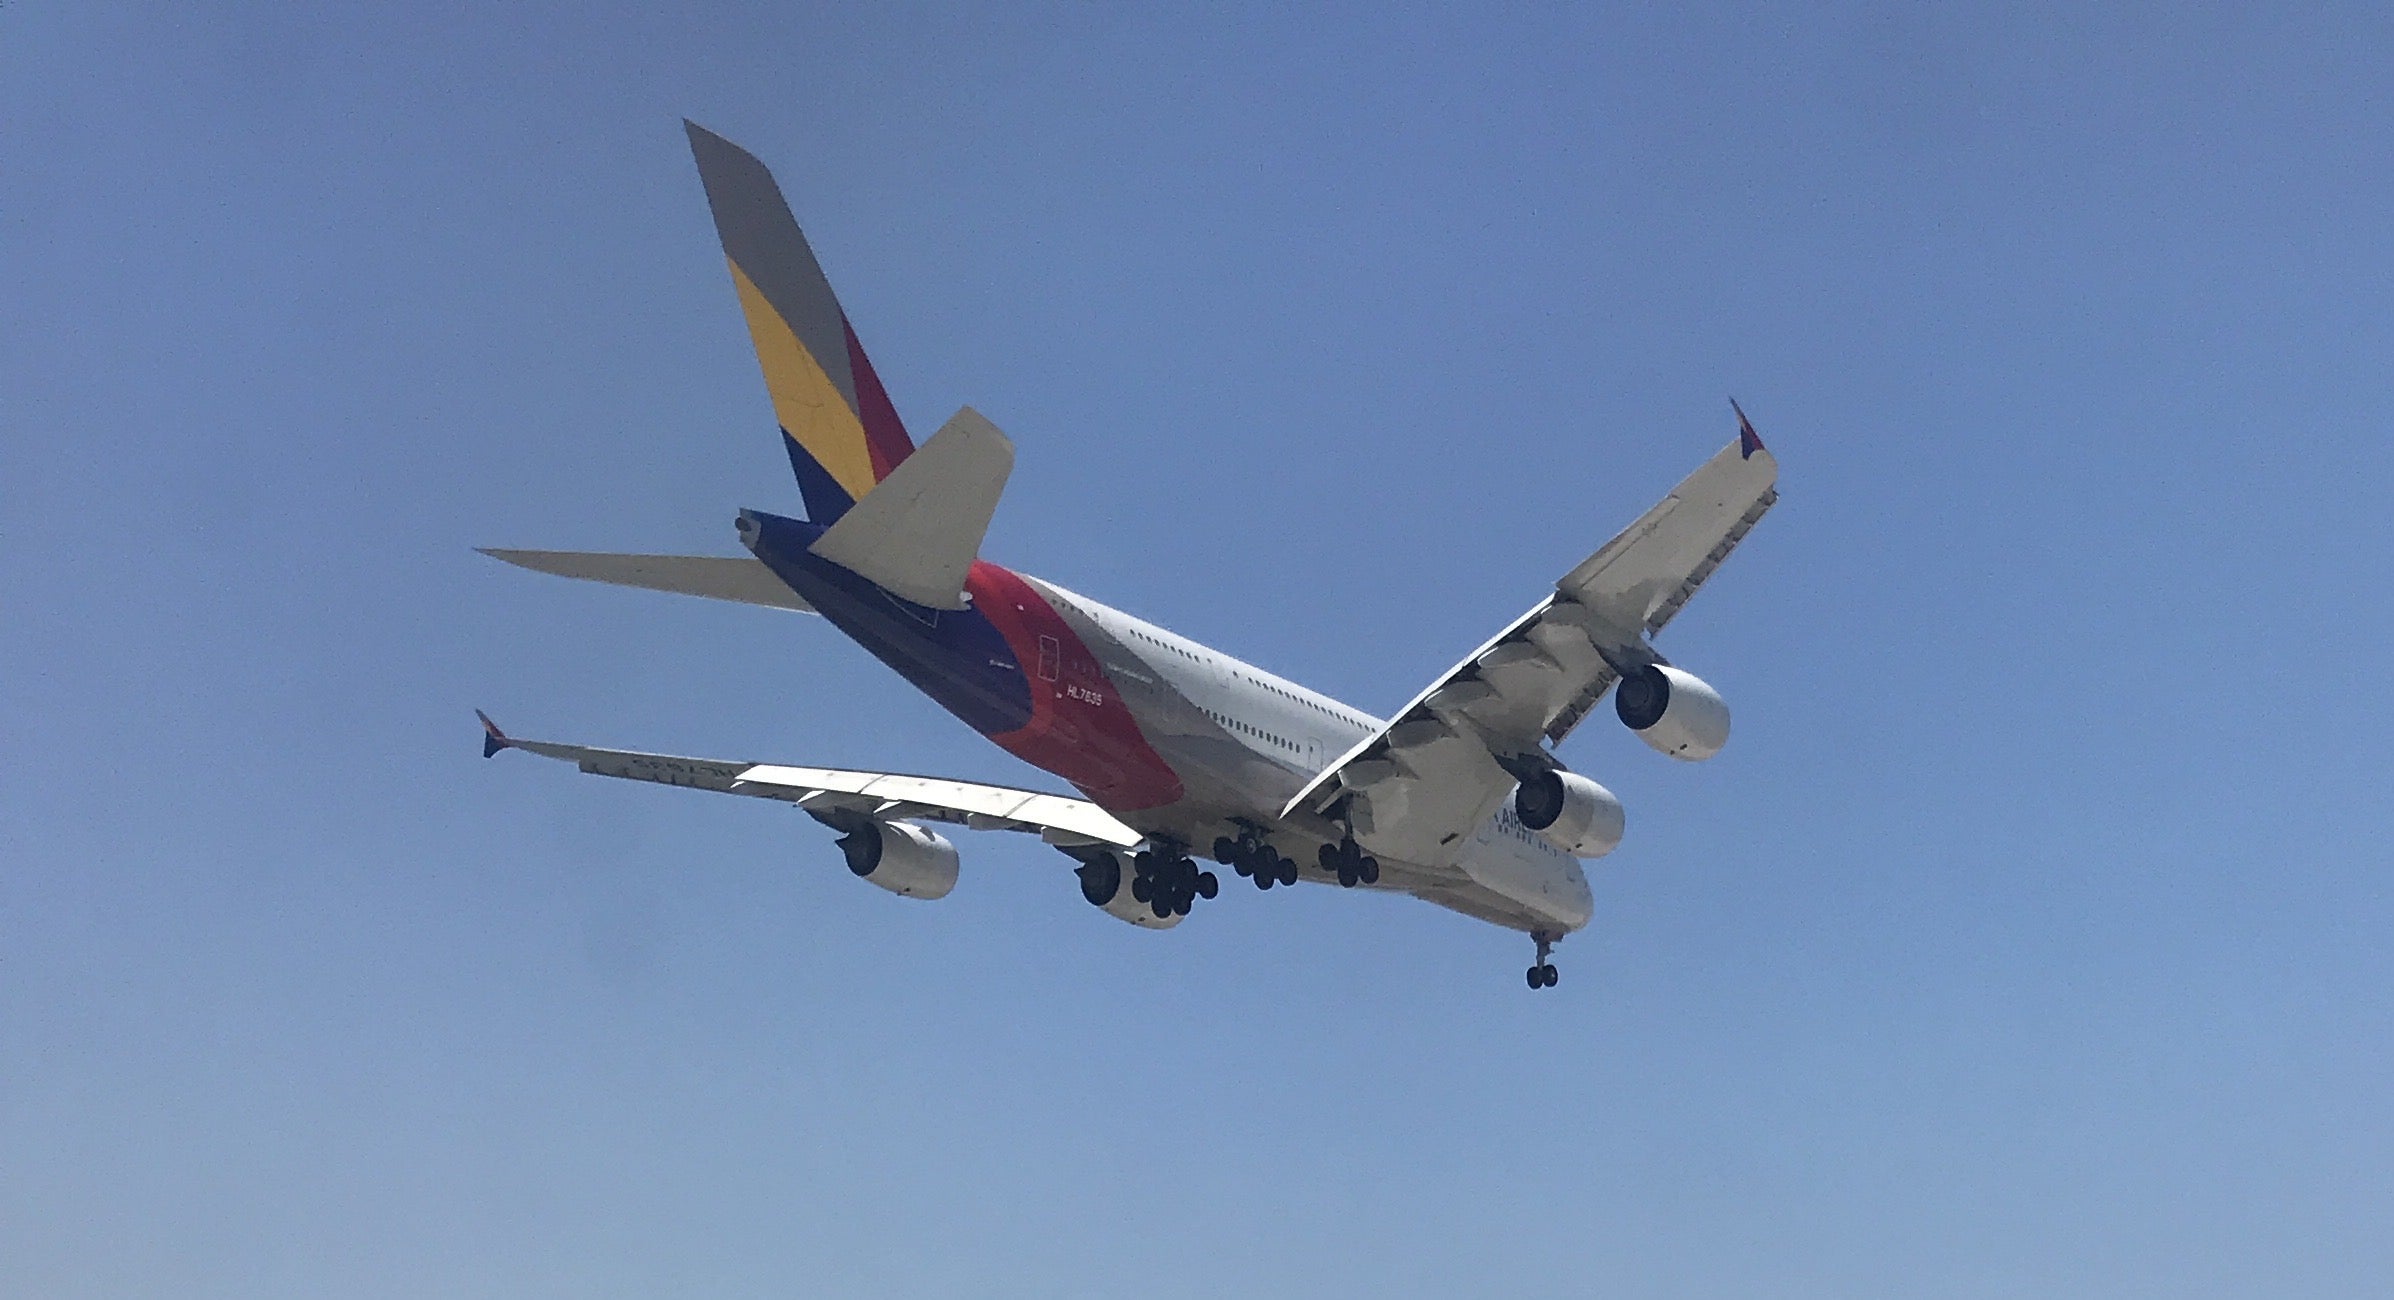 Asiana A380 HL7835 arriving at JFK in 2018